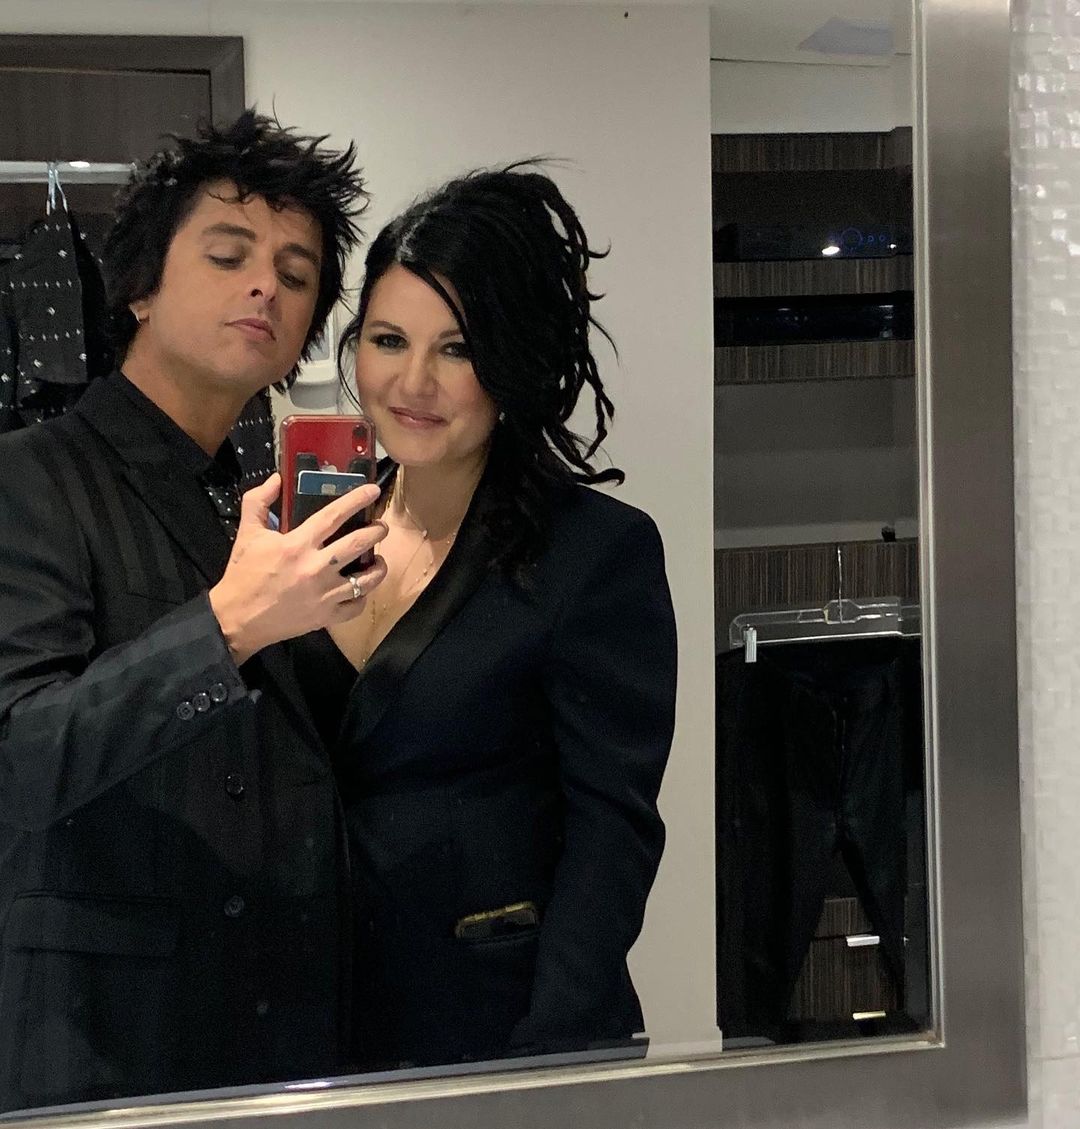 Billie Joe Armstrong taking a mirror selfie with his wife Adrienne Armstrong